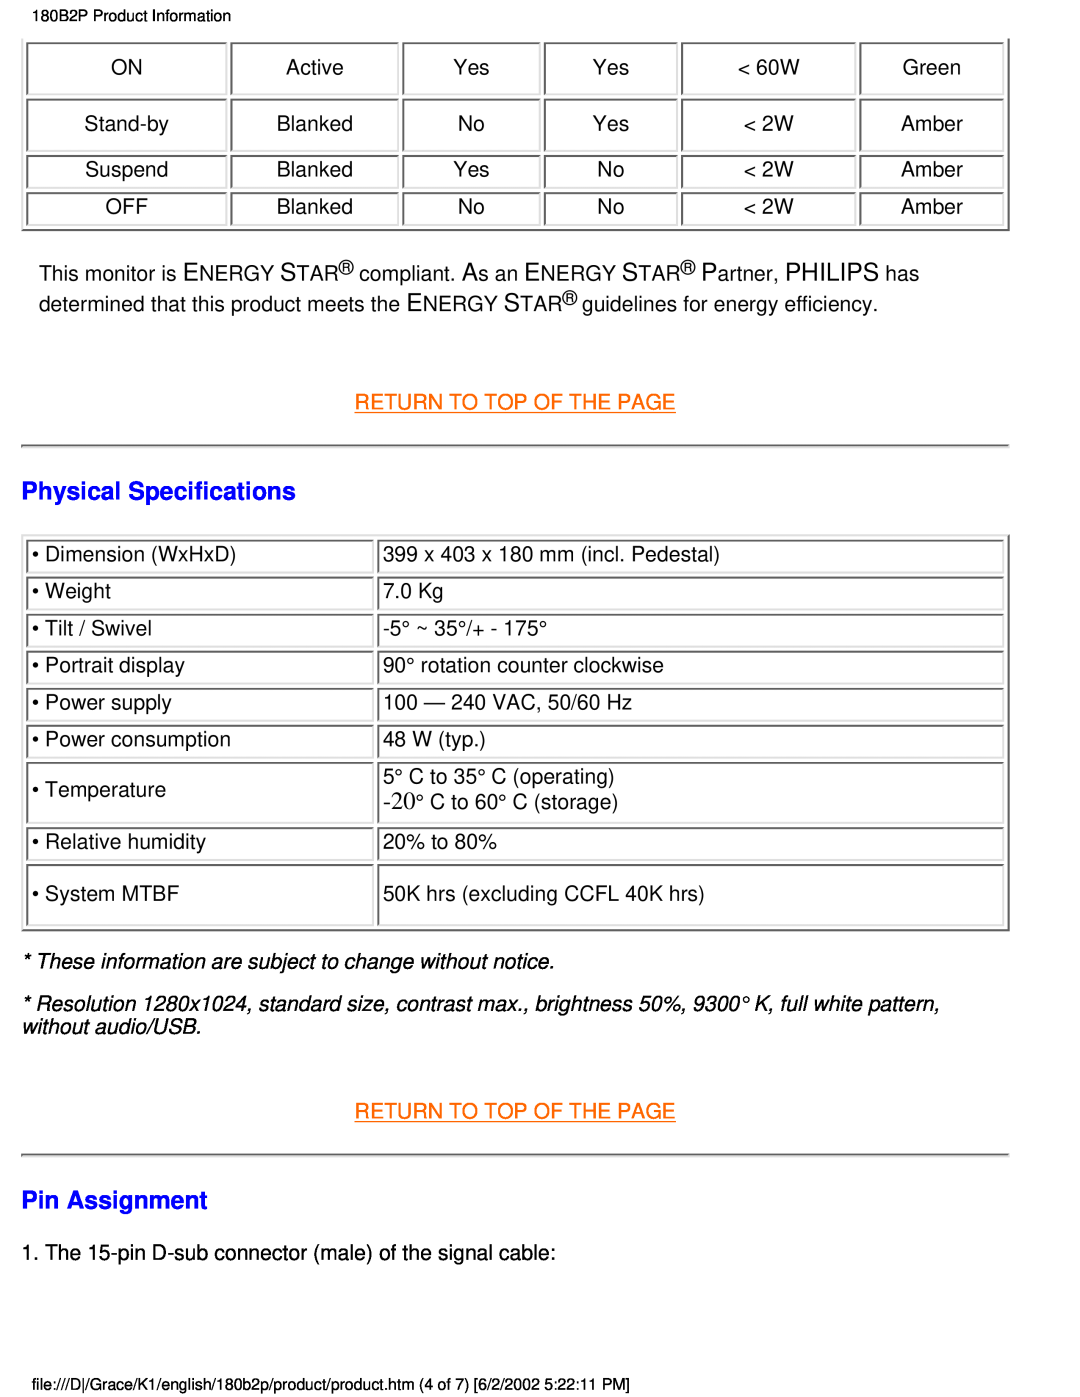 Philips 180B2P user manual Physical Specifications, Pin Assignment, Return To Top Of The Page 